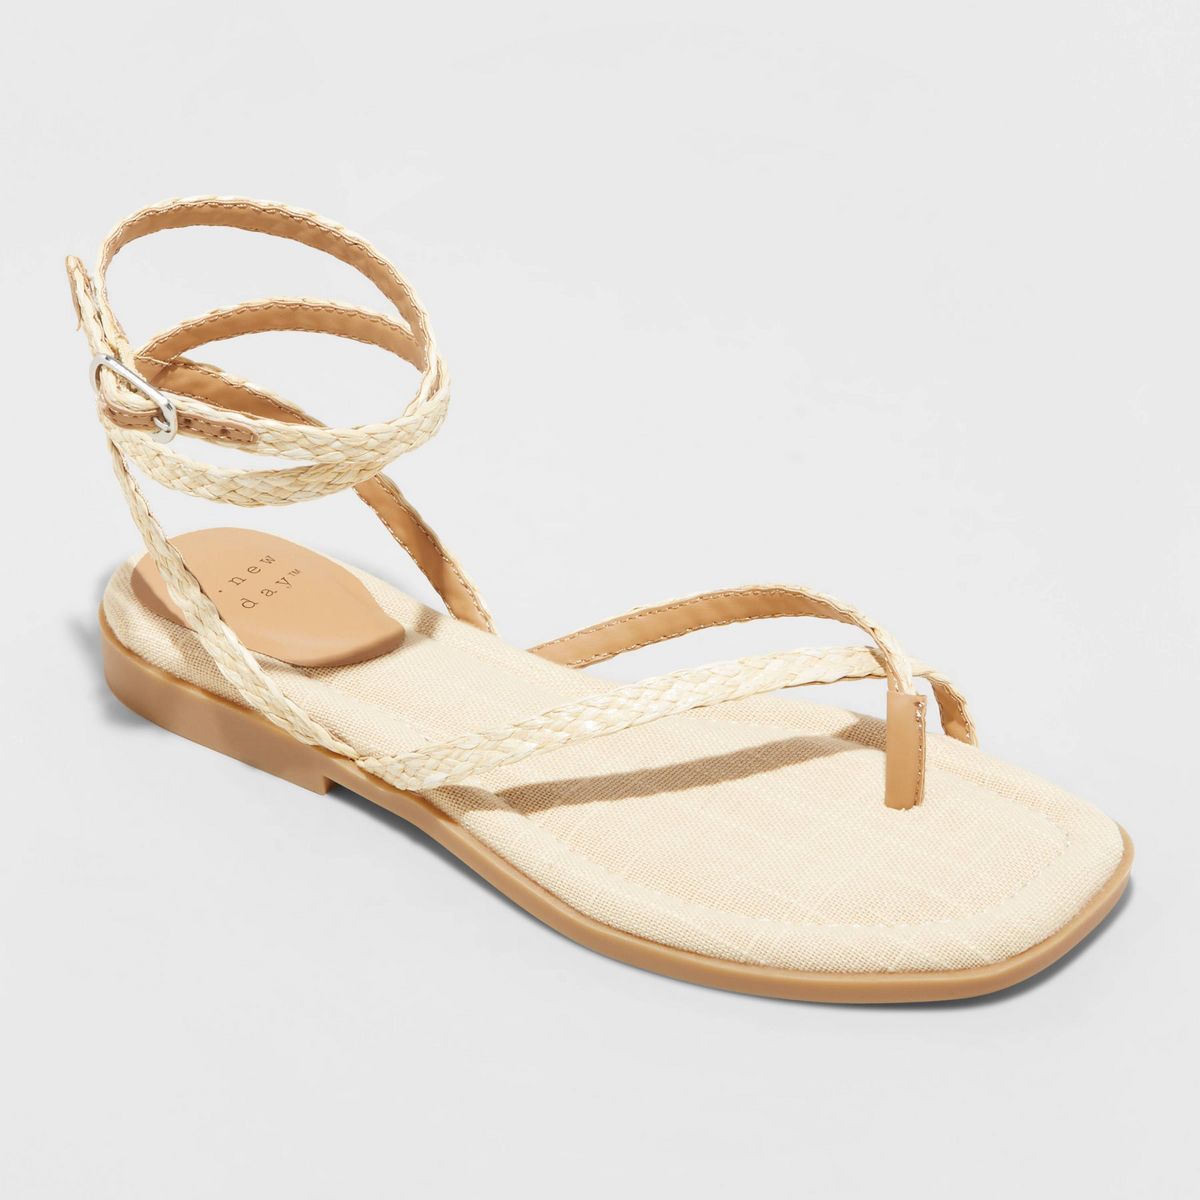 Women's Luisa Ankle Strap Thong Sandals - A New Day™ Beige 8 | Target